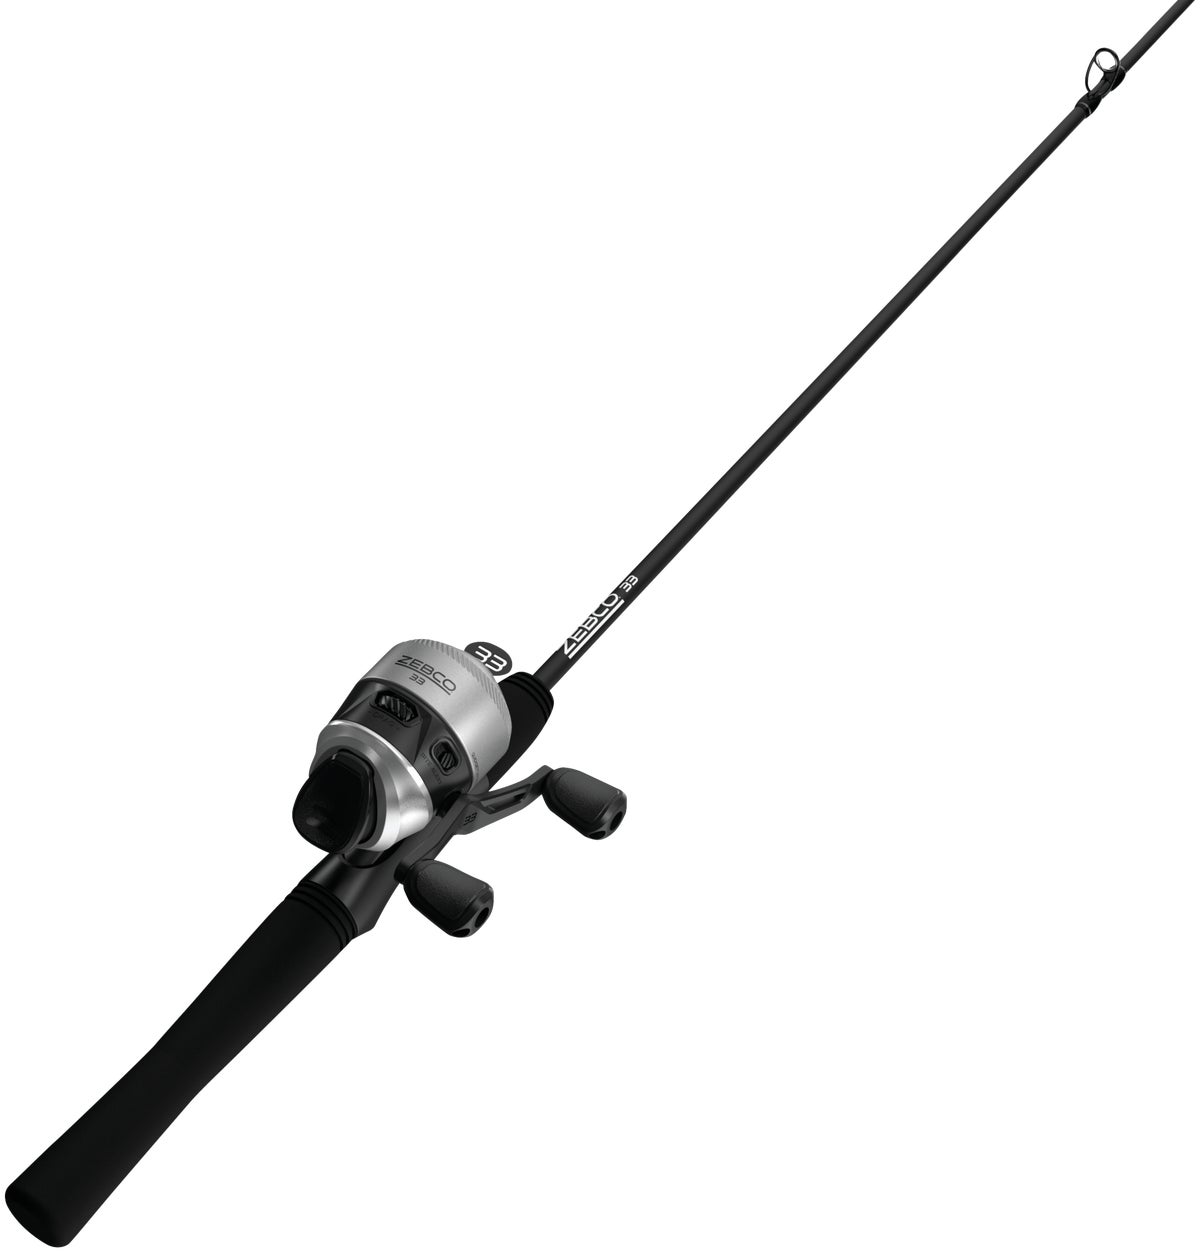 New Lady pink Zebco 33 Authentic CASTING PUSH BUTTON  Rod Medium 6' REEL Combo 